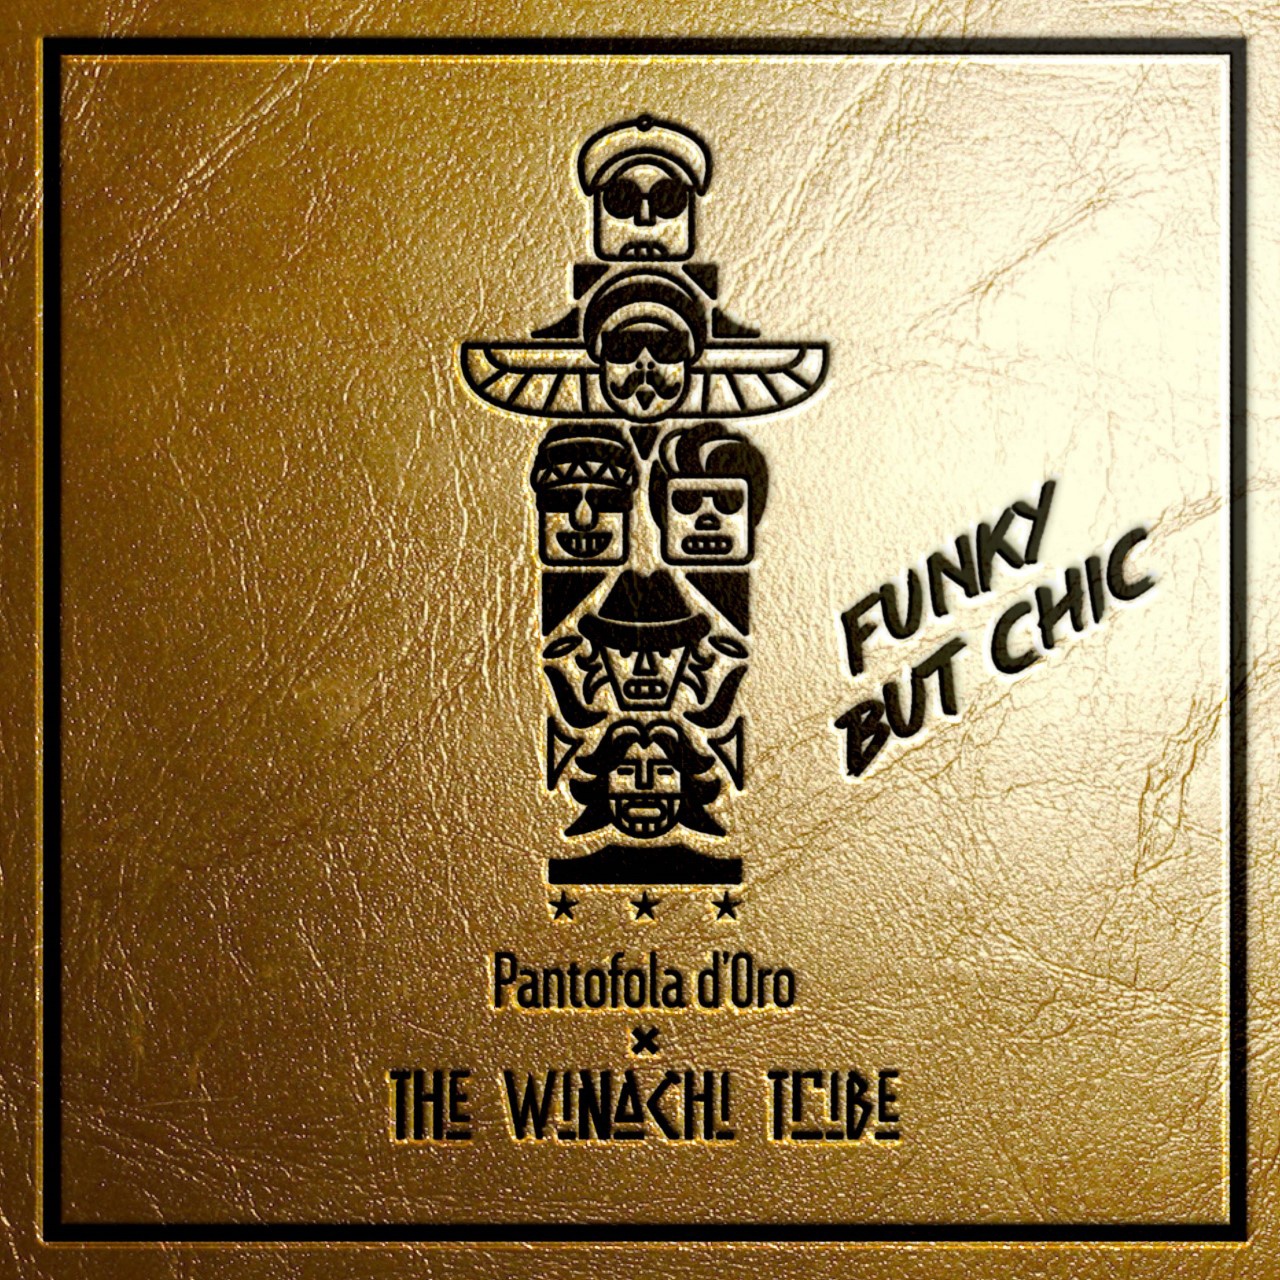 Electro Funk collective THE WINACHI TRIBE tease upcoming single 'Funky But Chic' 